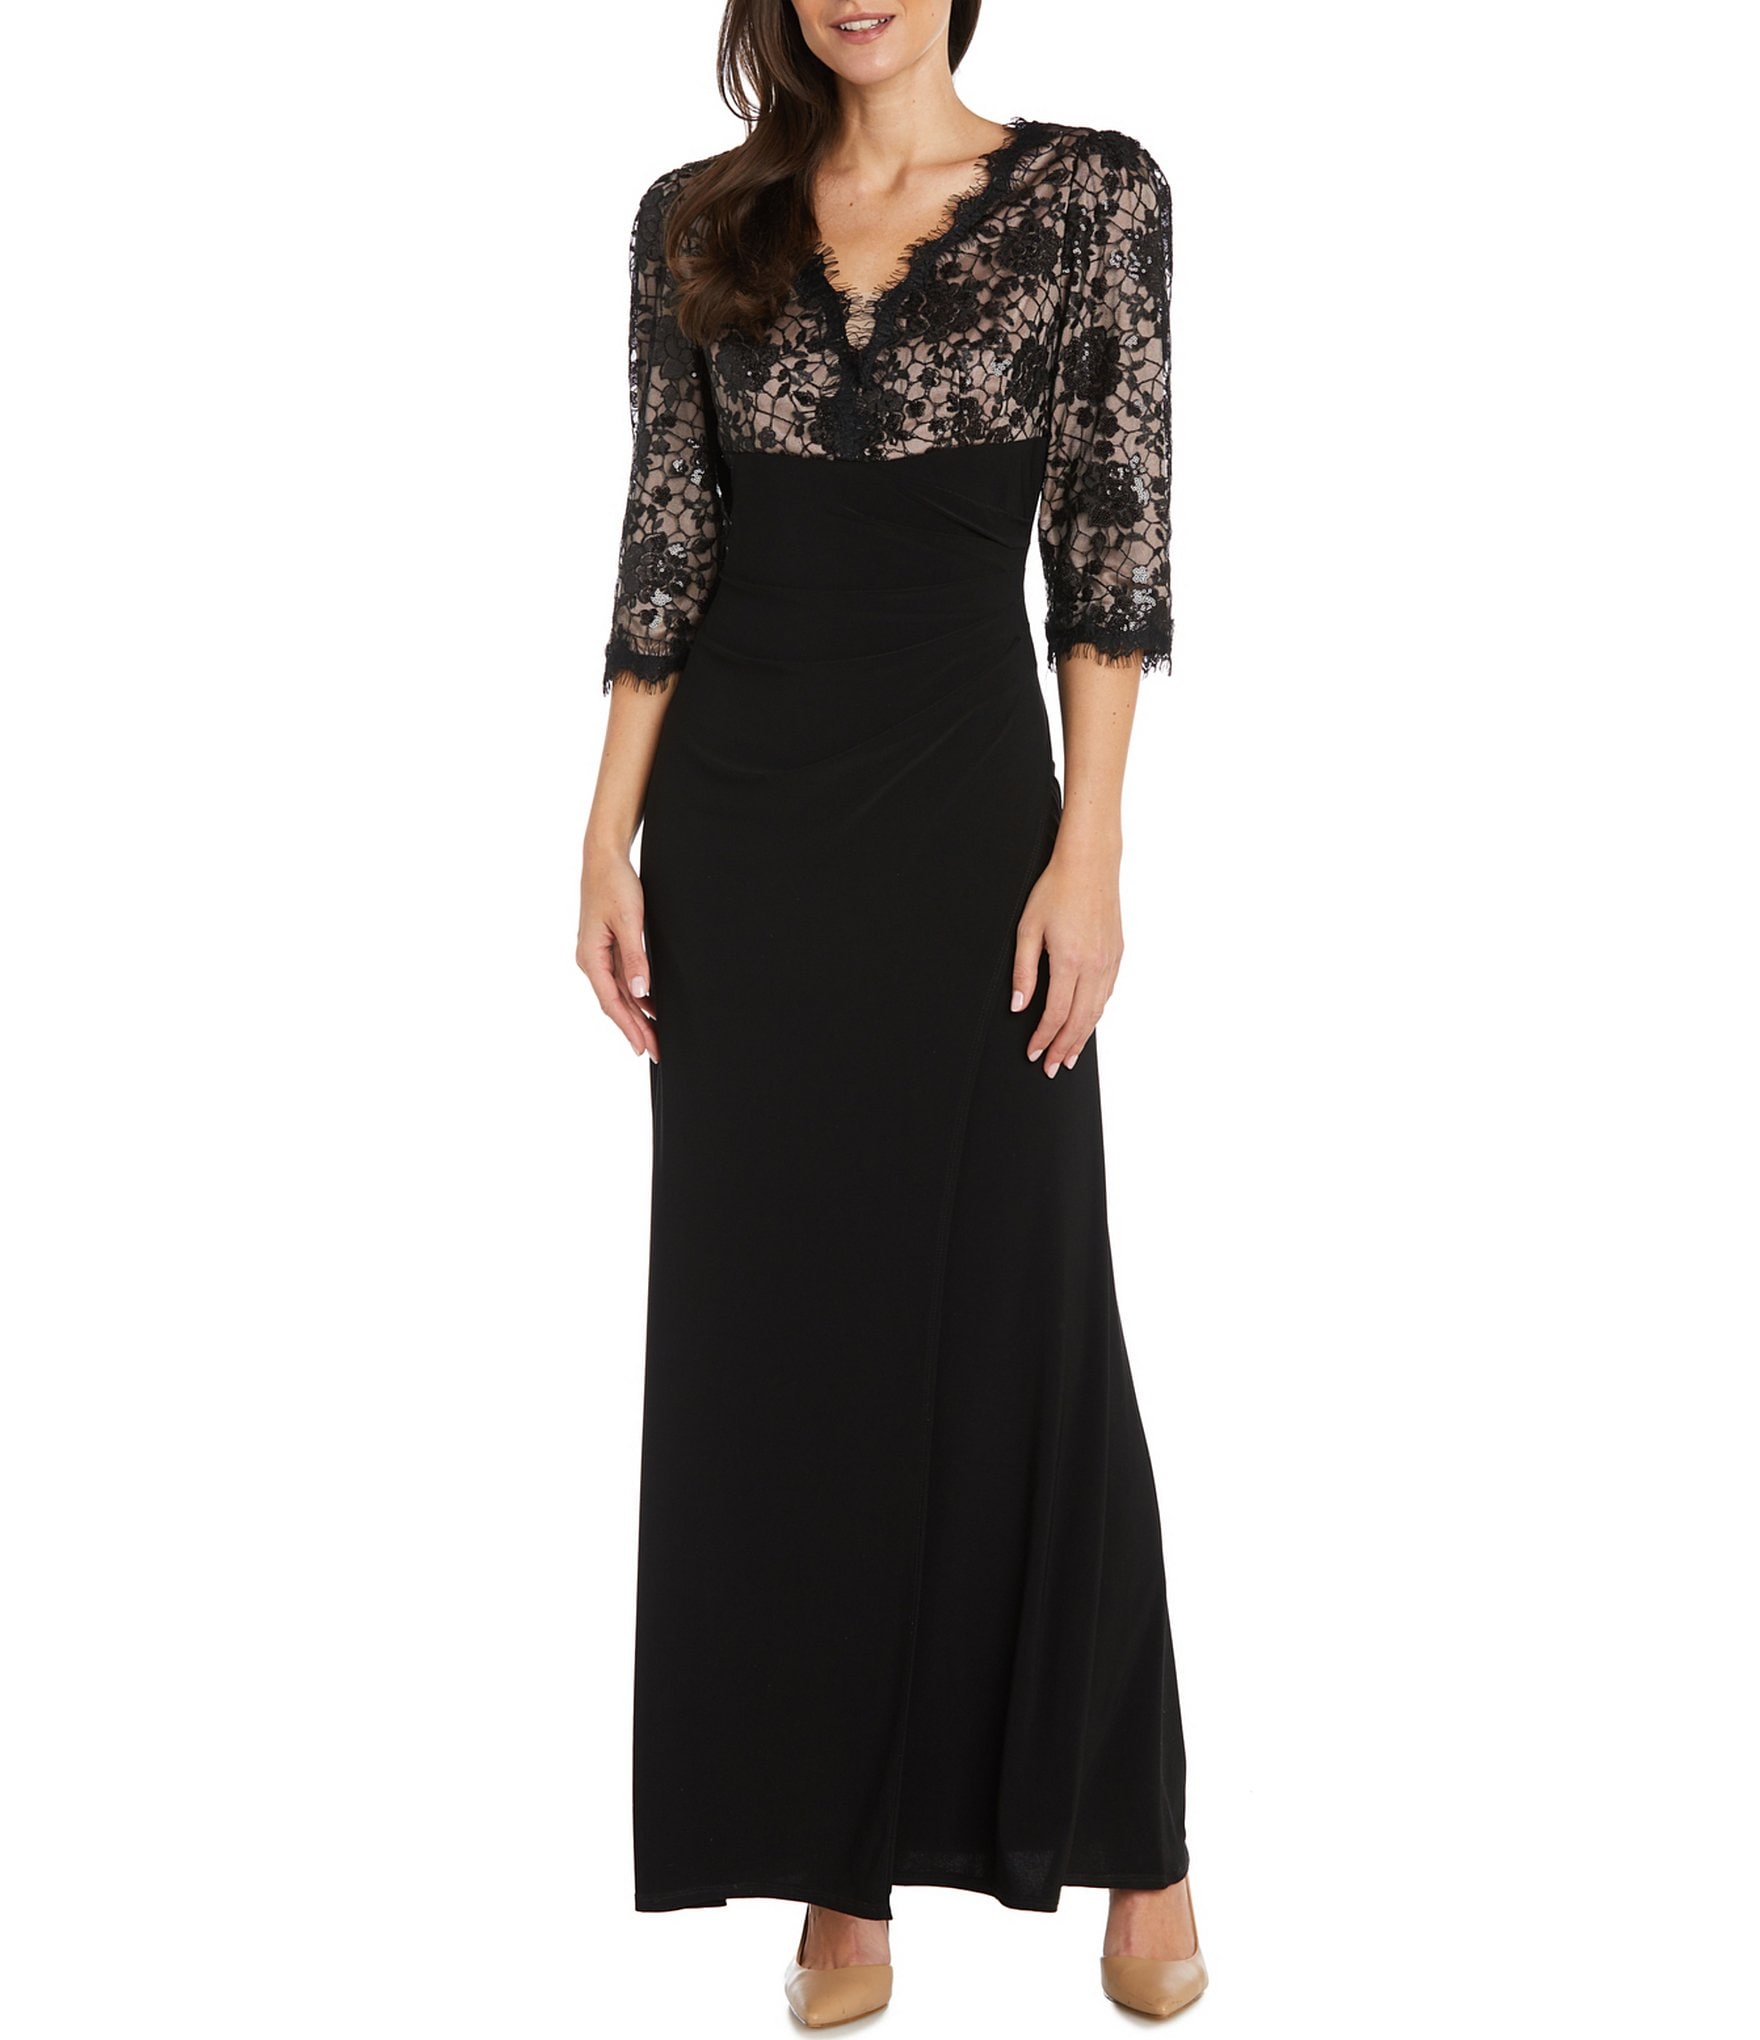 black lace dress with sleeves